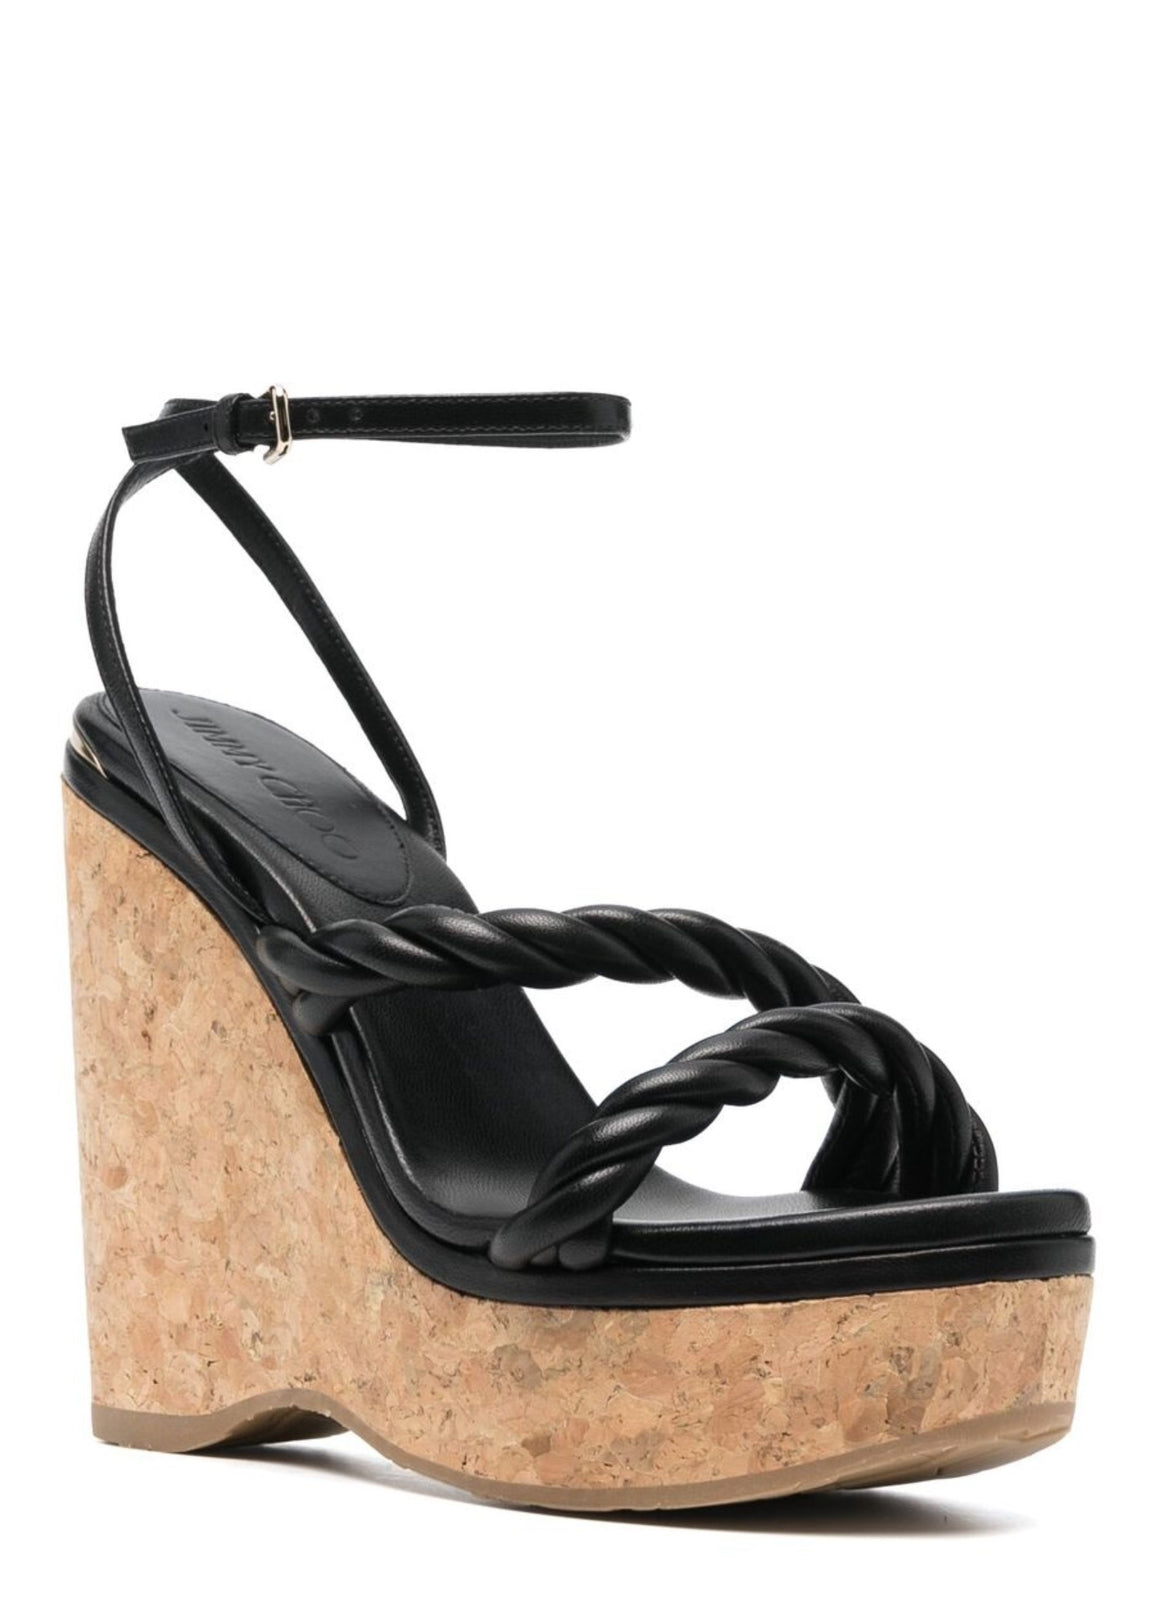 Diosa 130mm Wedge Sandals